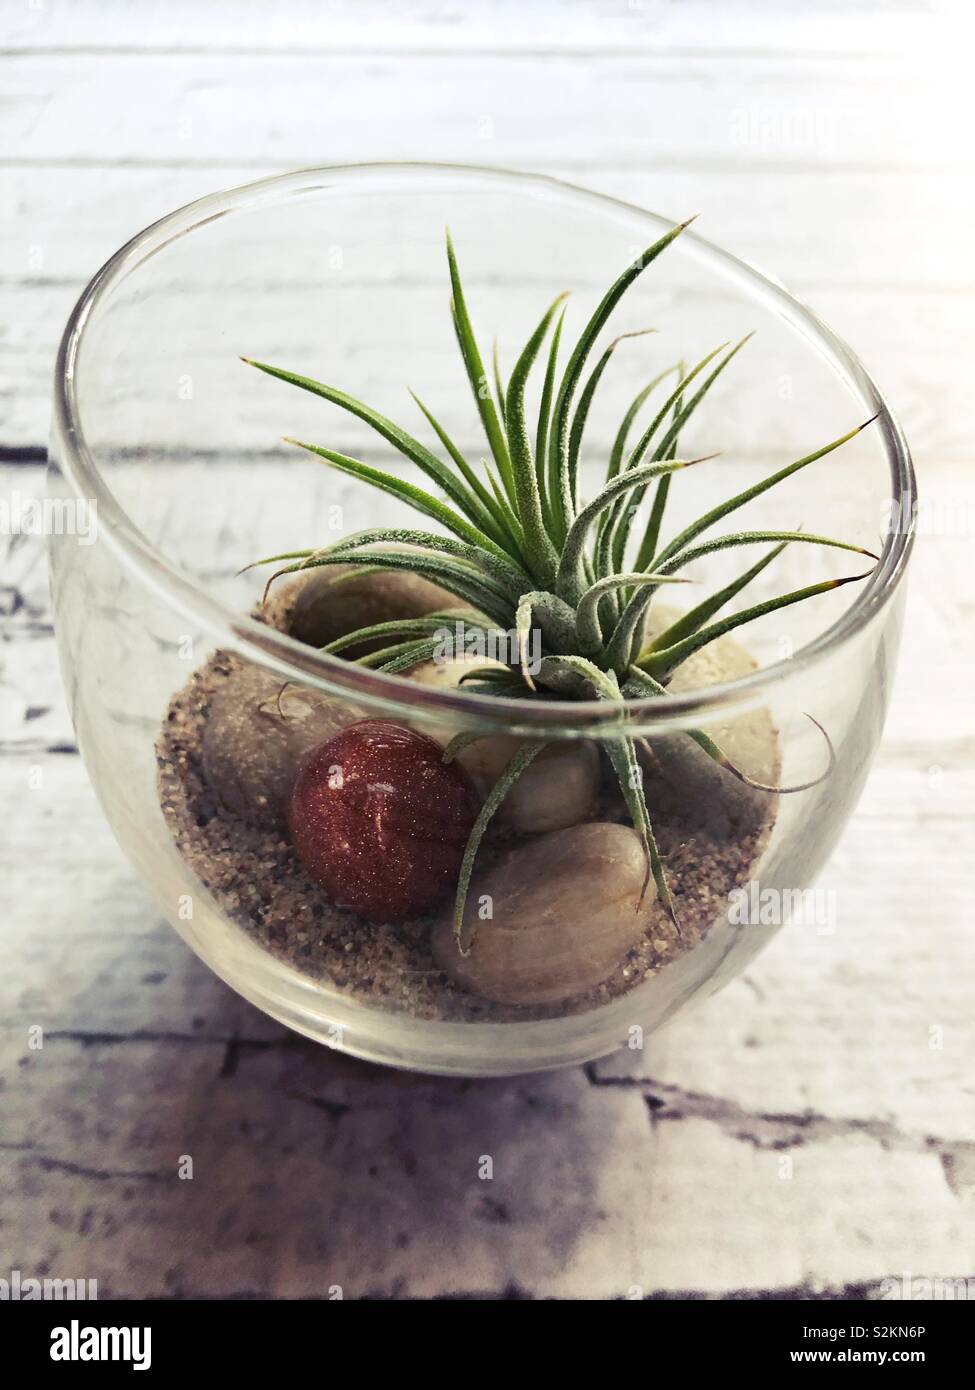 An air plant in a glass bowl. Stock Photo